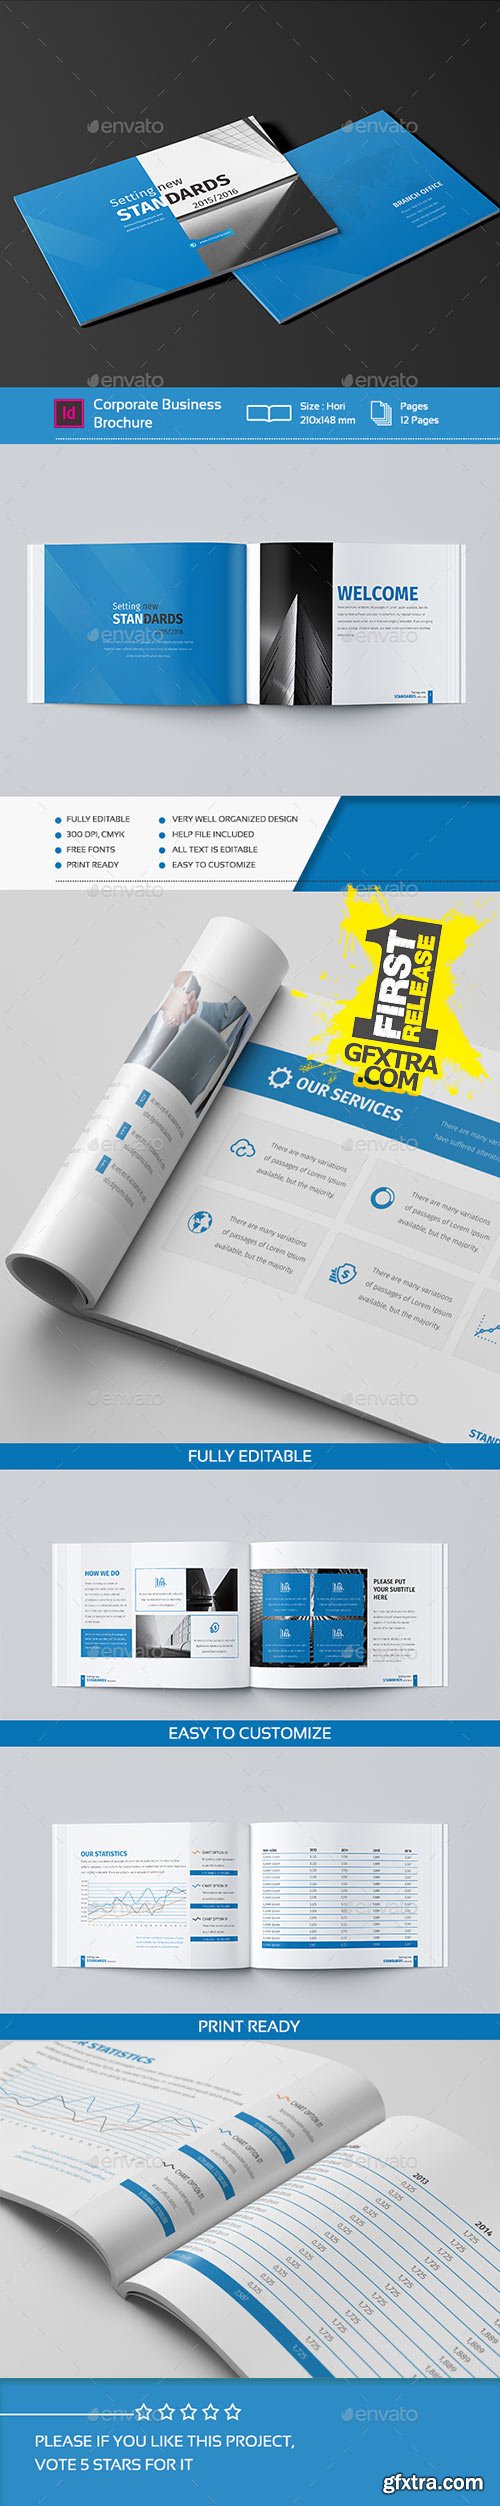 GraphicRiver - Mini Business Brochure 12 Pages A5 14233880